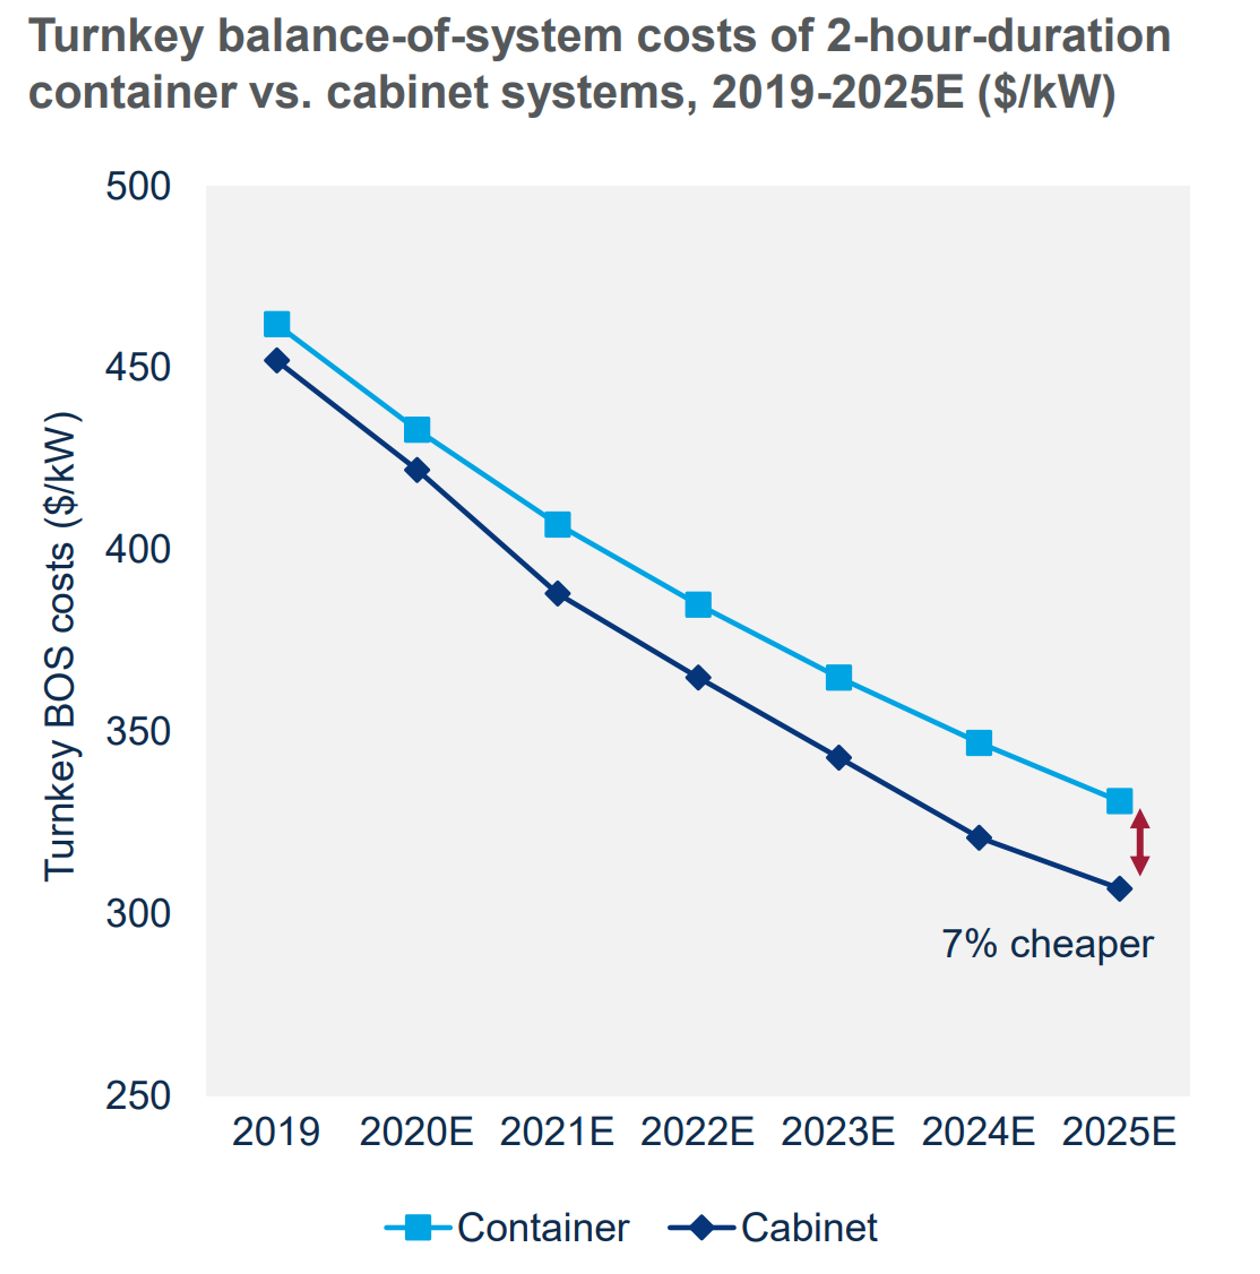 Turnkey BOS costs of 2 hour duration container vs. cabinet systems, 2019-2025E